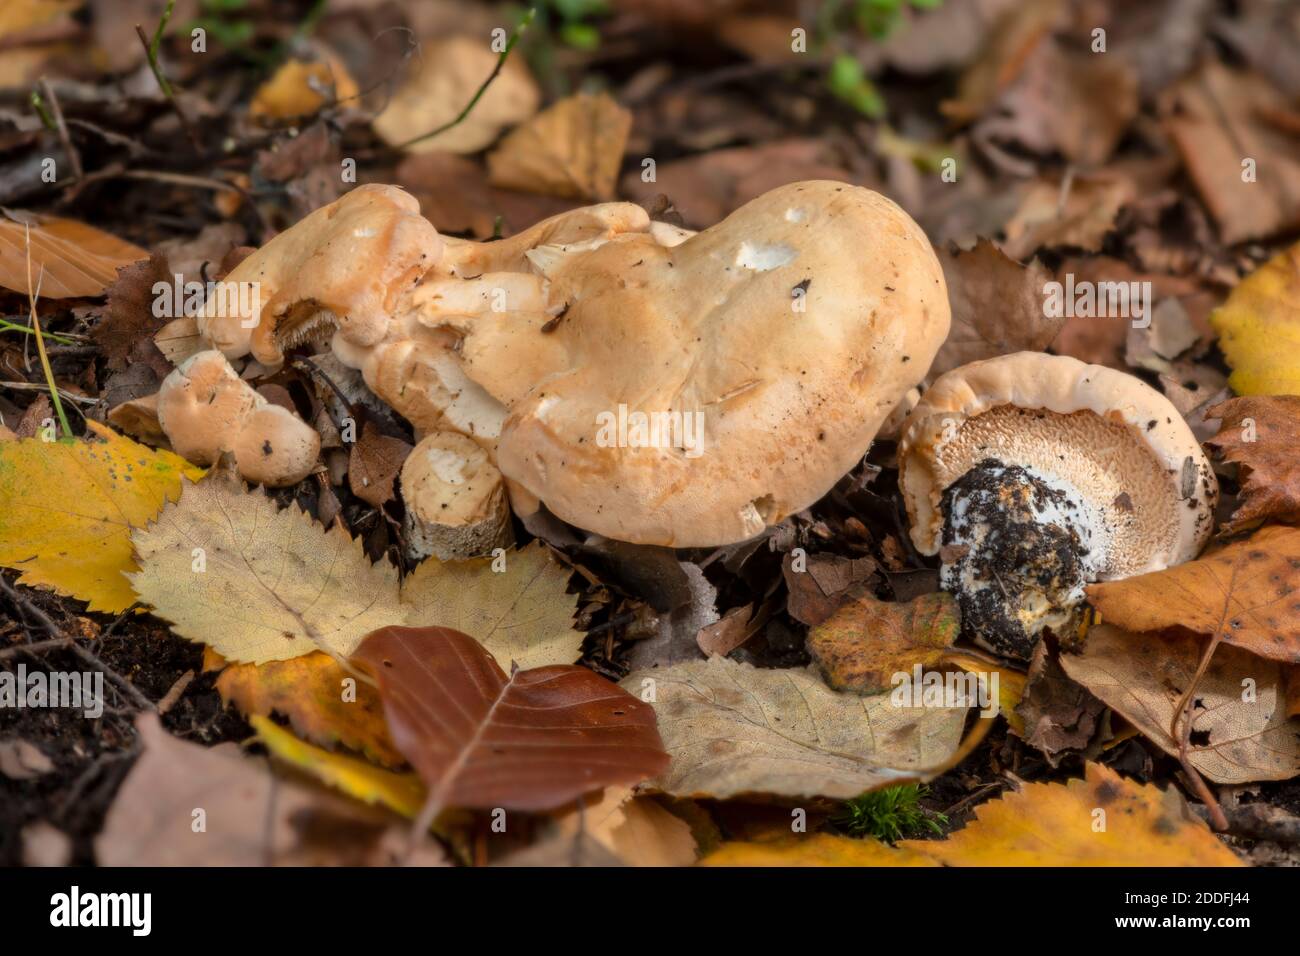 Wood hedgehog, Hydnum repandum, growing in mixed deciduous woodland, New Forest. Stock Photo